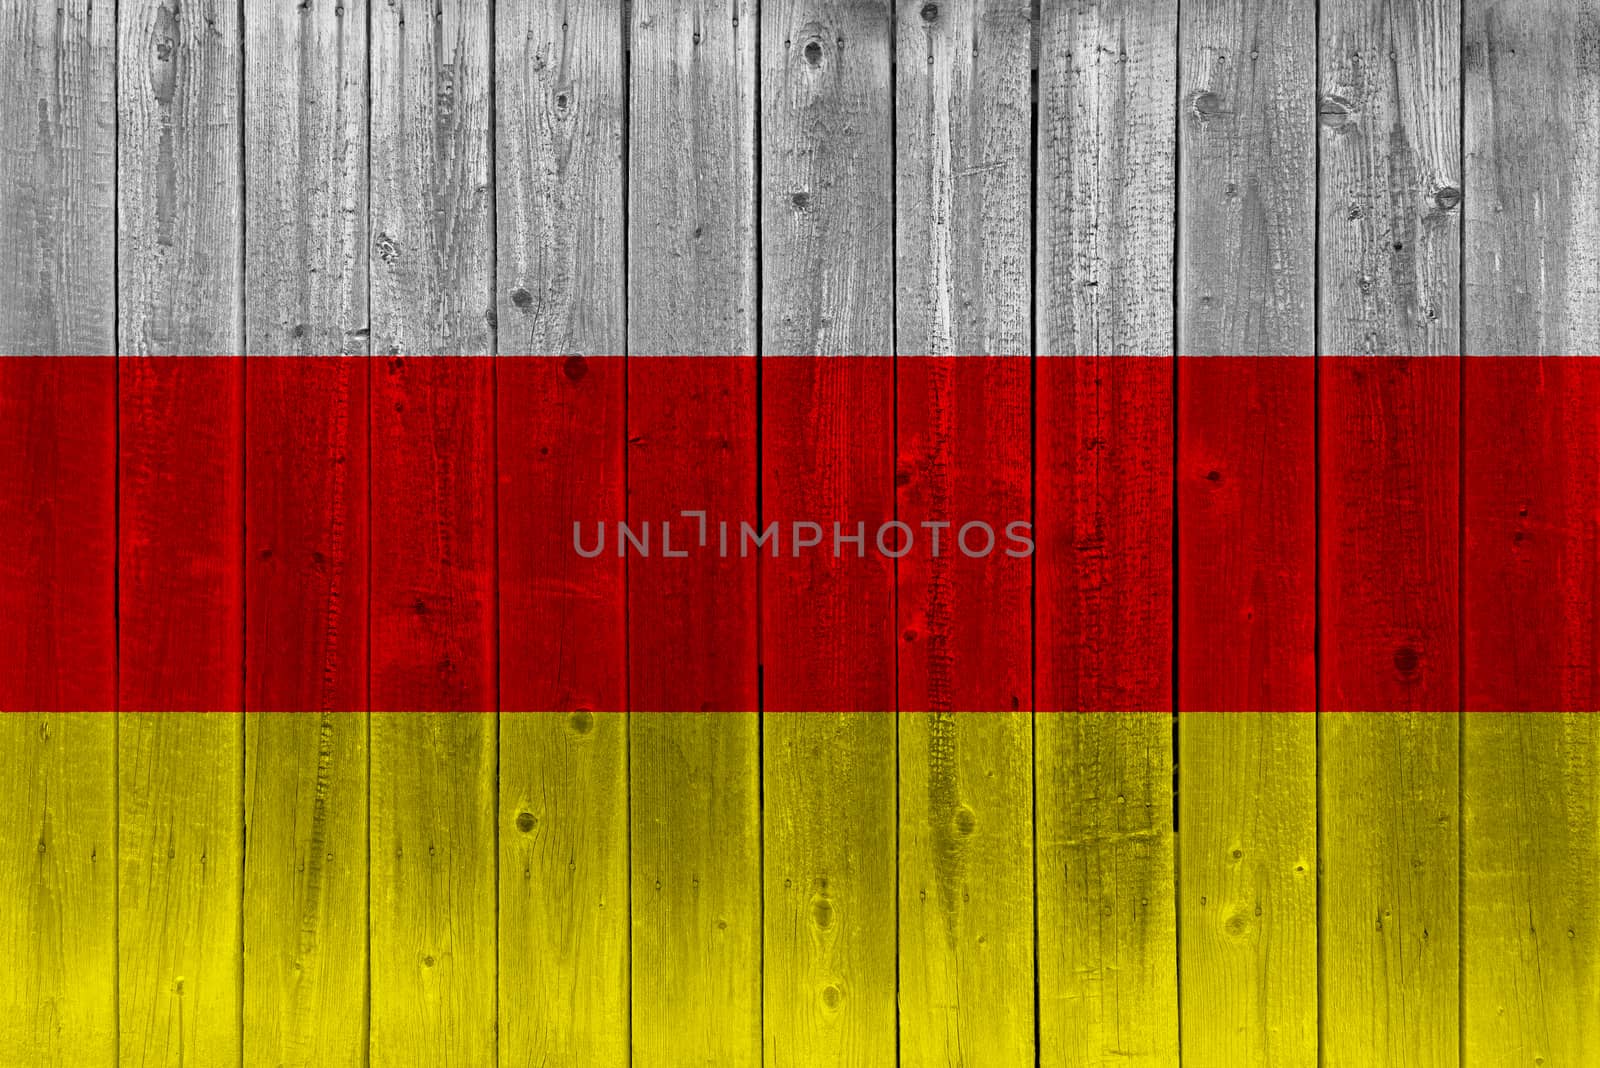 South ossetia flag painted on old wood plank. Patriotic background. National flag of South ossetia